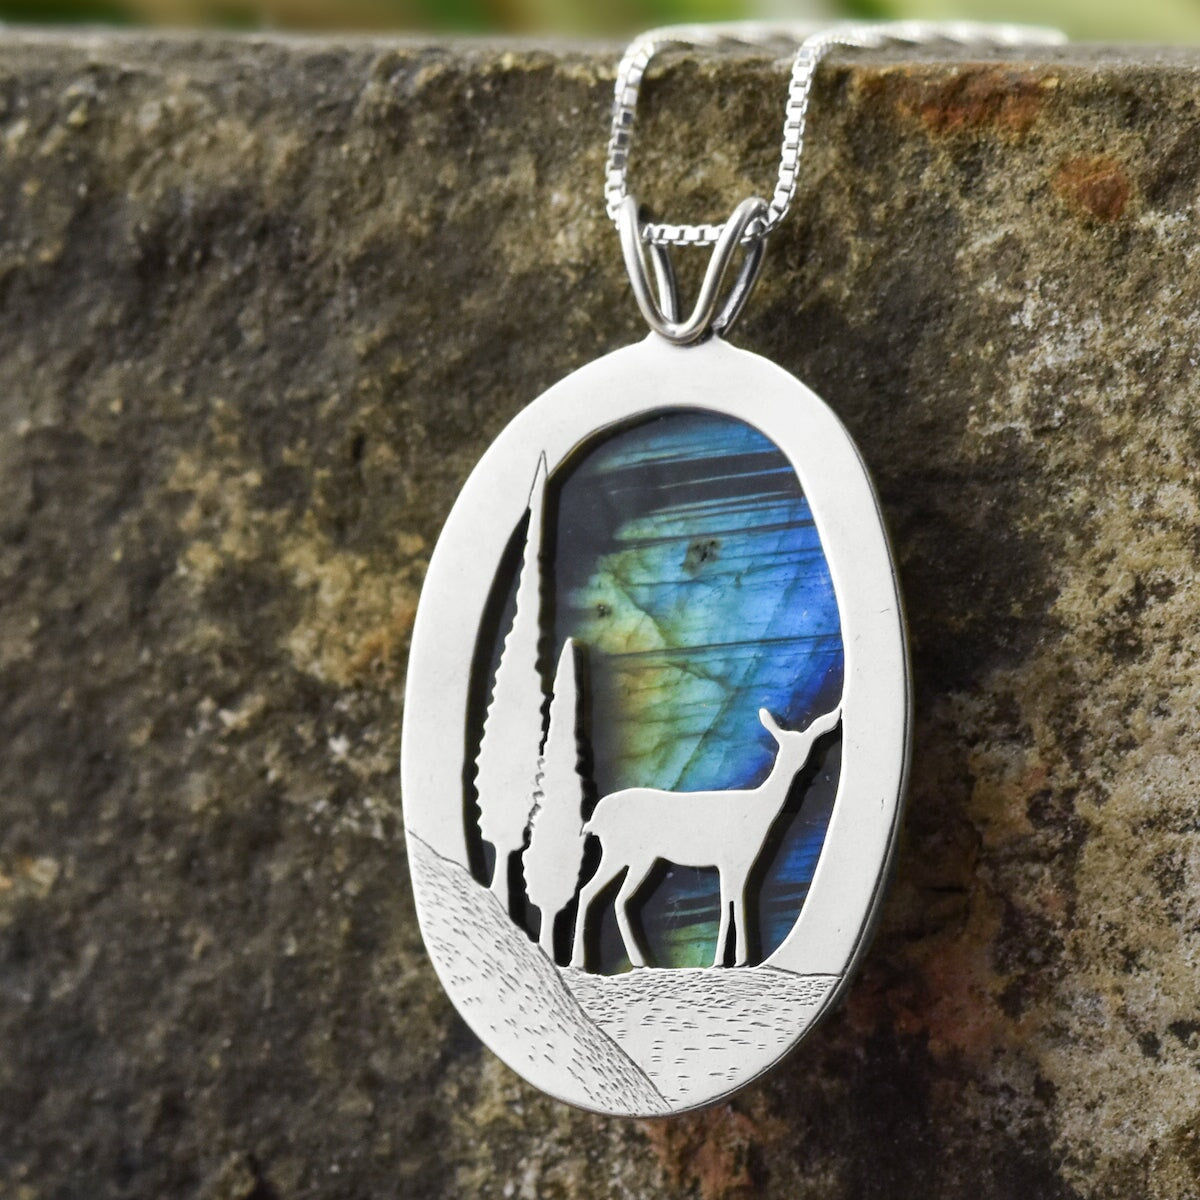 Choose Your Own Reversible Northern Lights Labradorite Deer Pendant - Silver Pendant Stone A - 34 x 19mm Stone B - 30 x 19mm 7113 - handmade by Beth Millner Jewelry